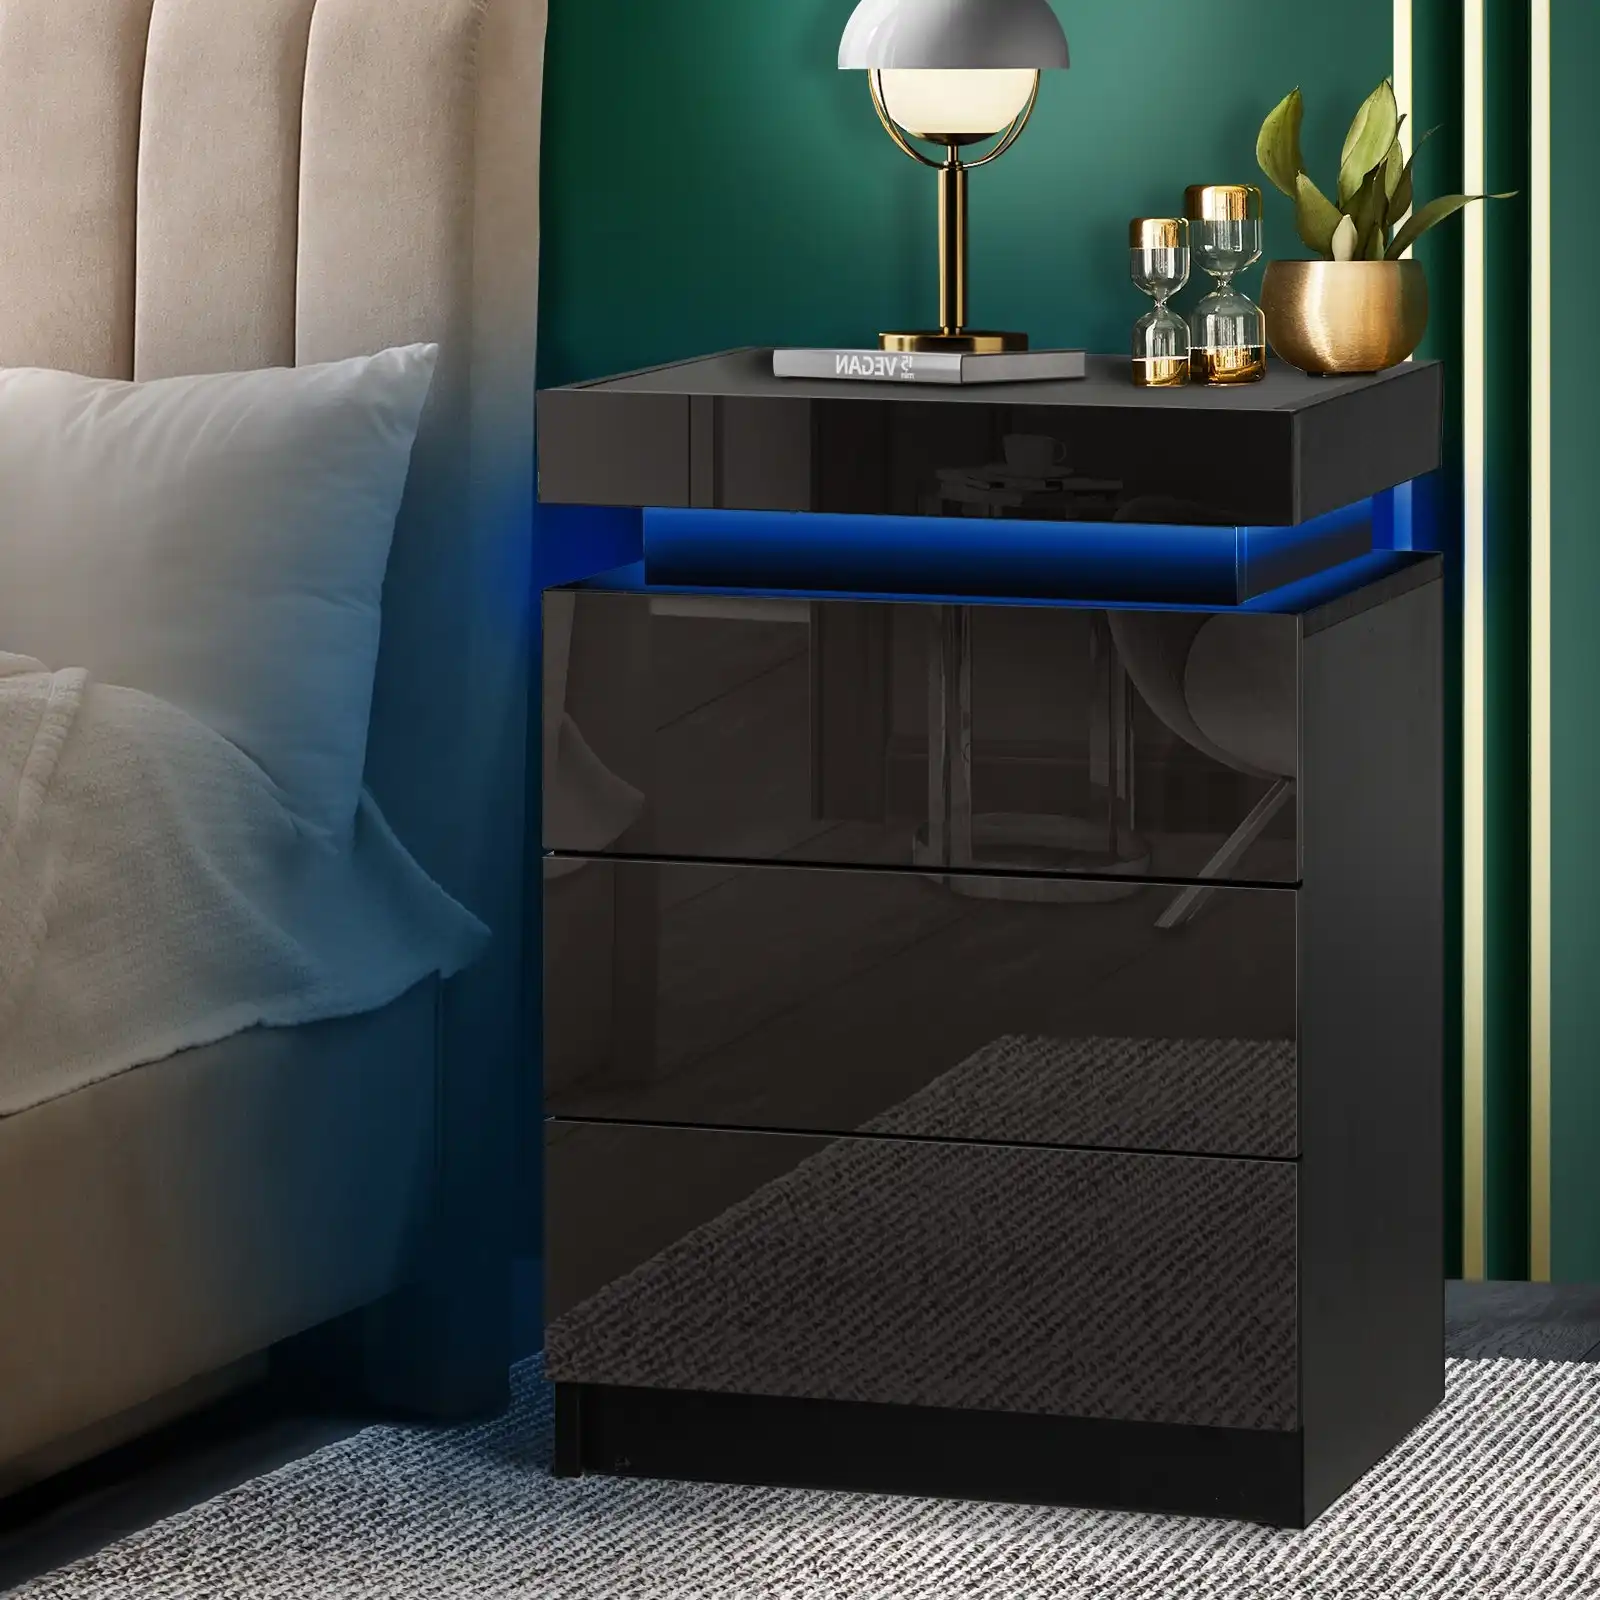 Oikiture Bedside Table RGB LED Nightstand Cabinet 3 Drawers Side Table Furniture Black